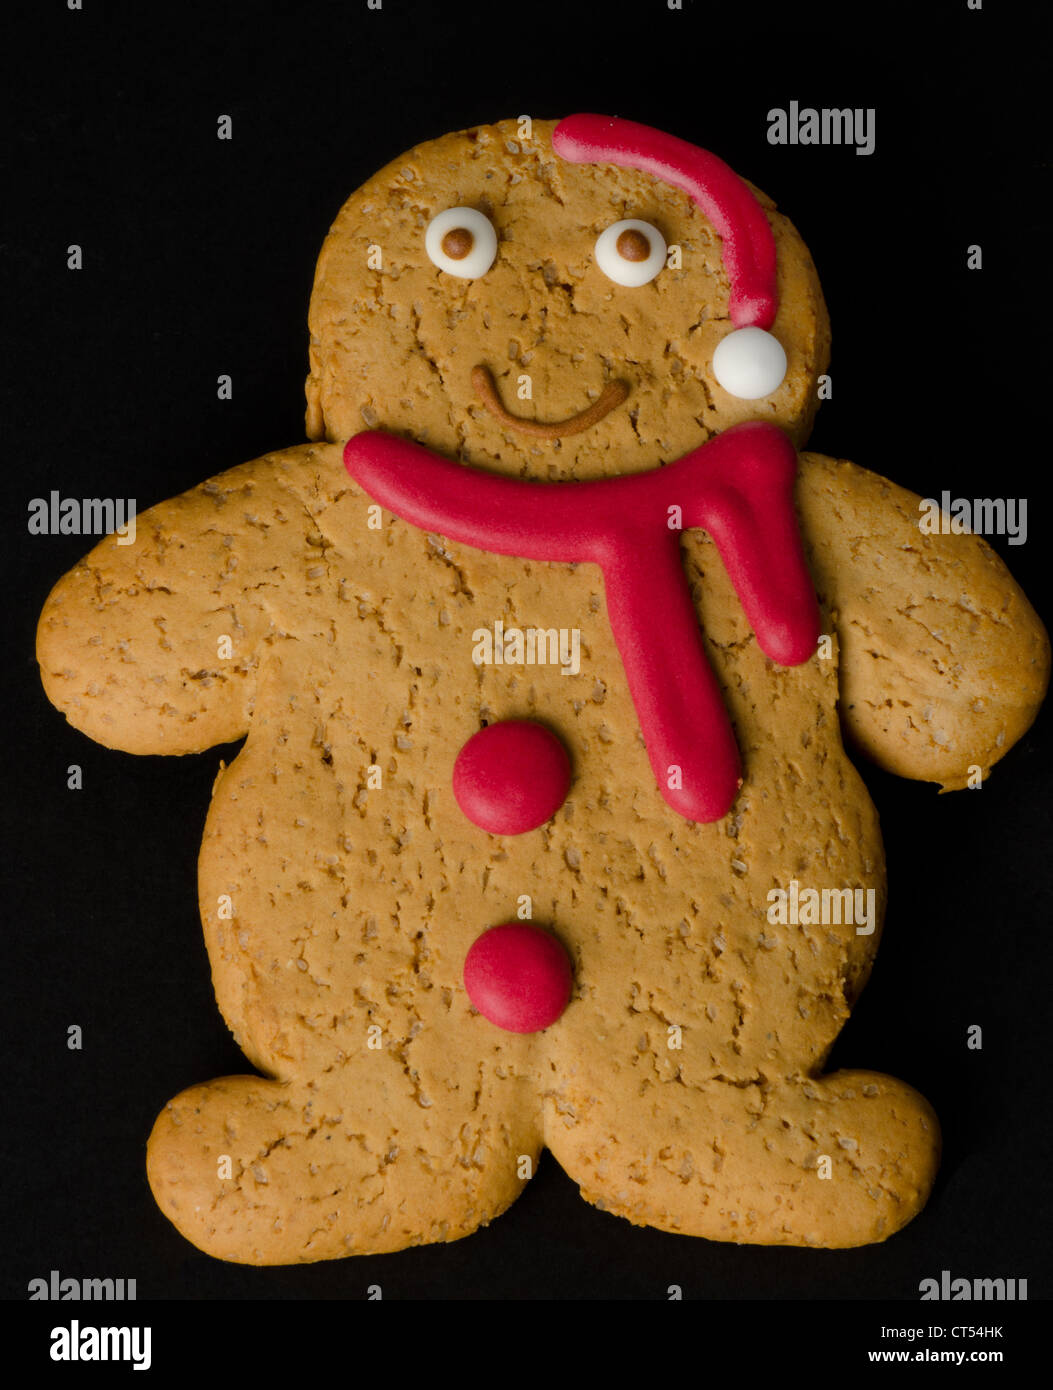 Gingerbread man with a Christmas red hat and scarf Stock Photo